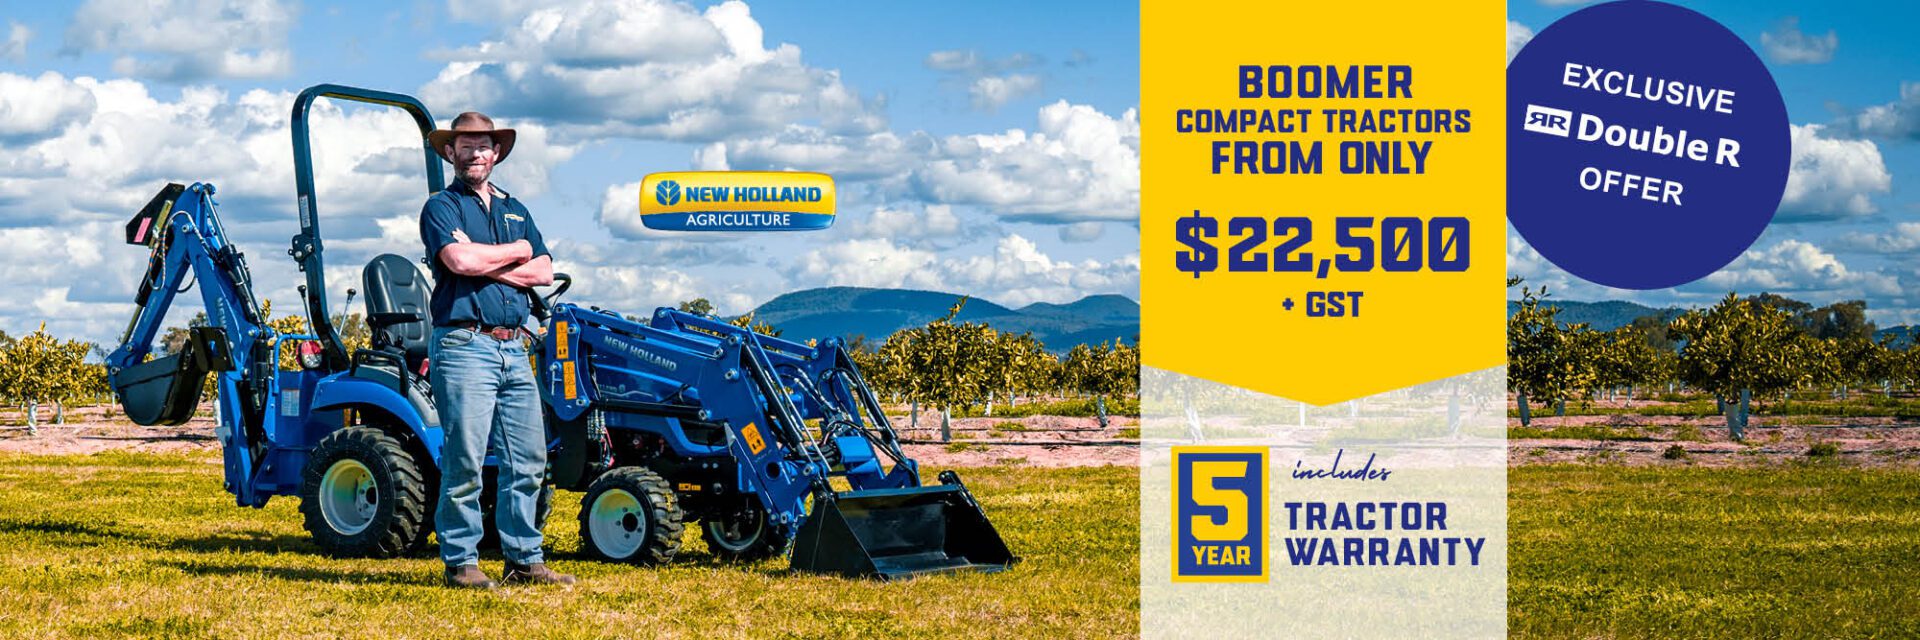 New Holland Boomer Exclusive Double R Offers